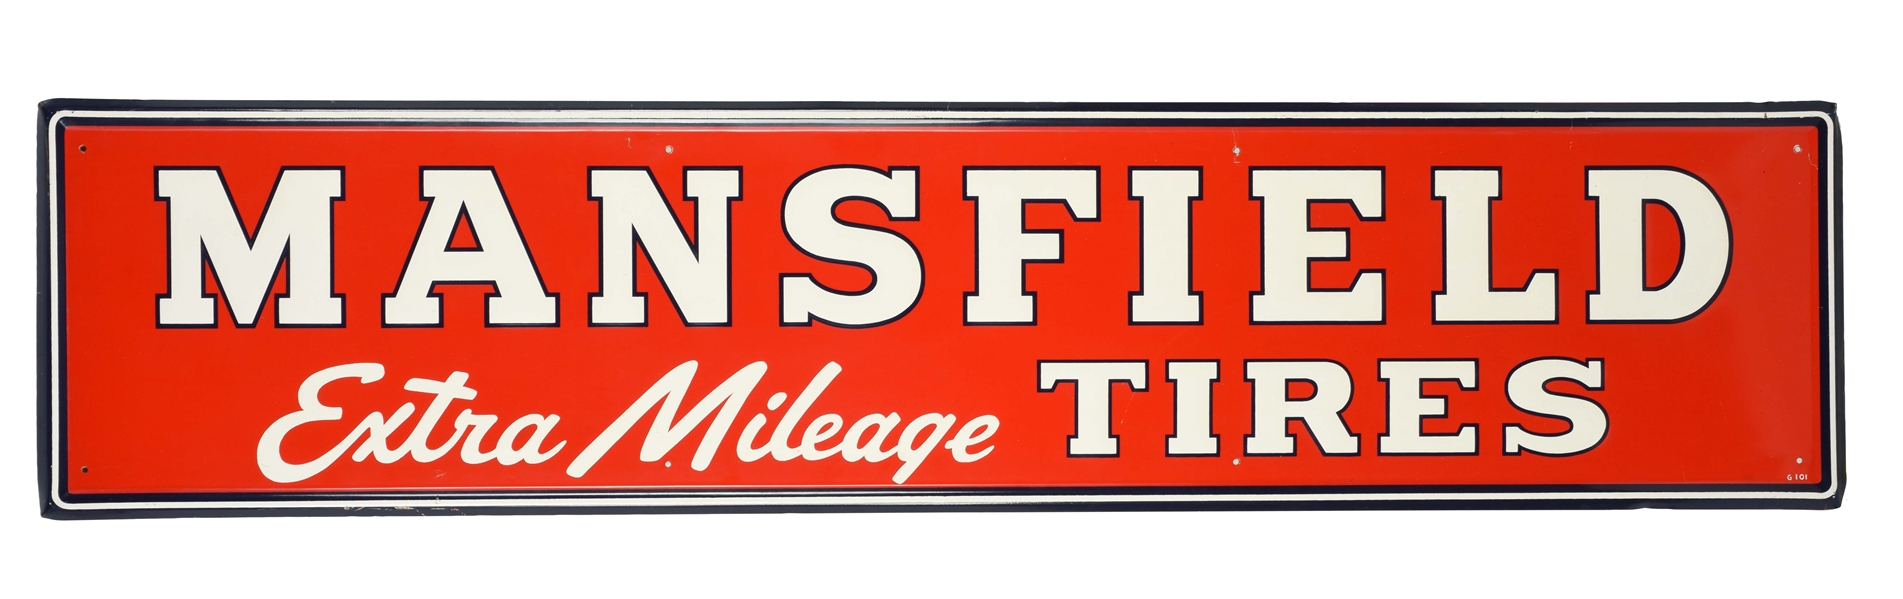 MANSFIELD EXTRA MILEAGE TIRES EMBOSSED TIN SIGN.